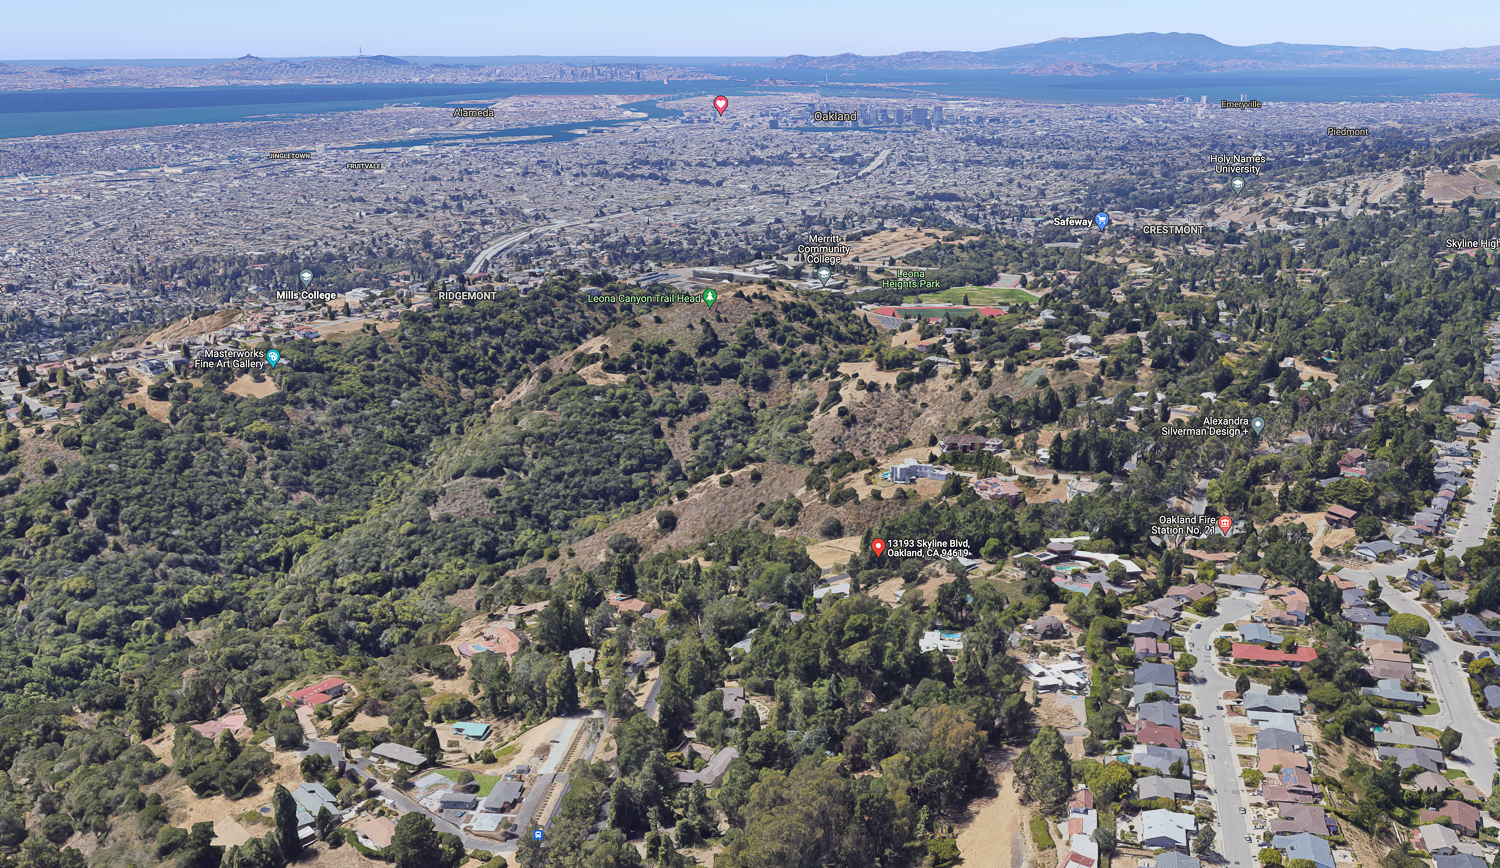 13193 Skyline Boulevard, aerial view with the Bay Area in the background, image via Google Satellite